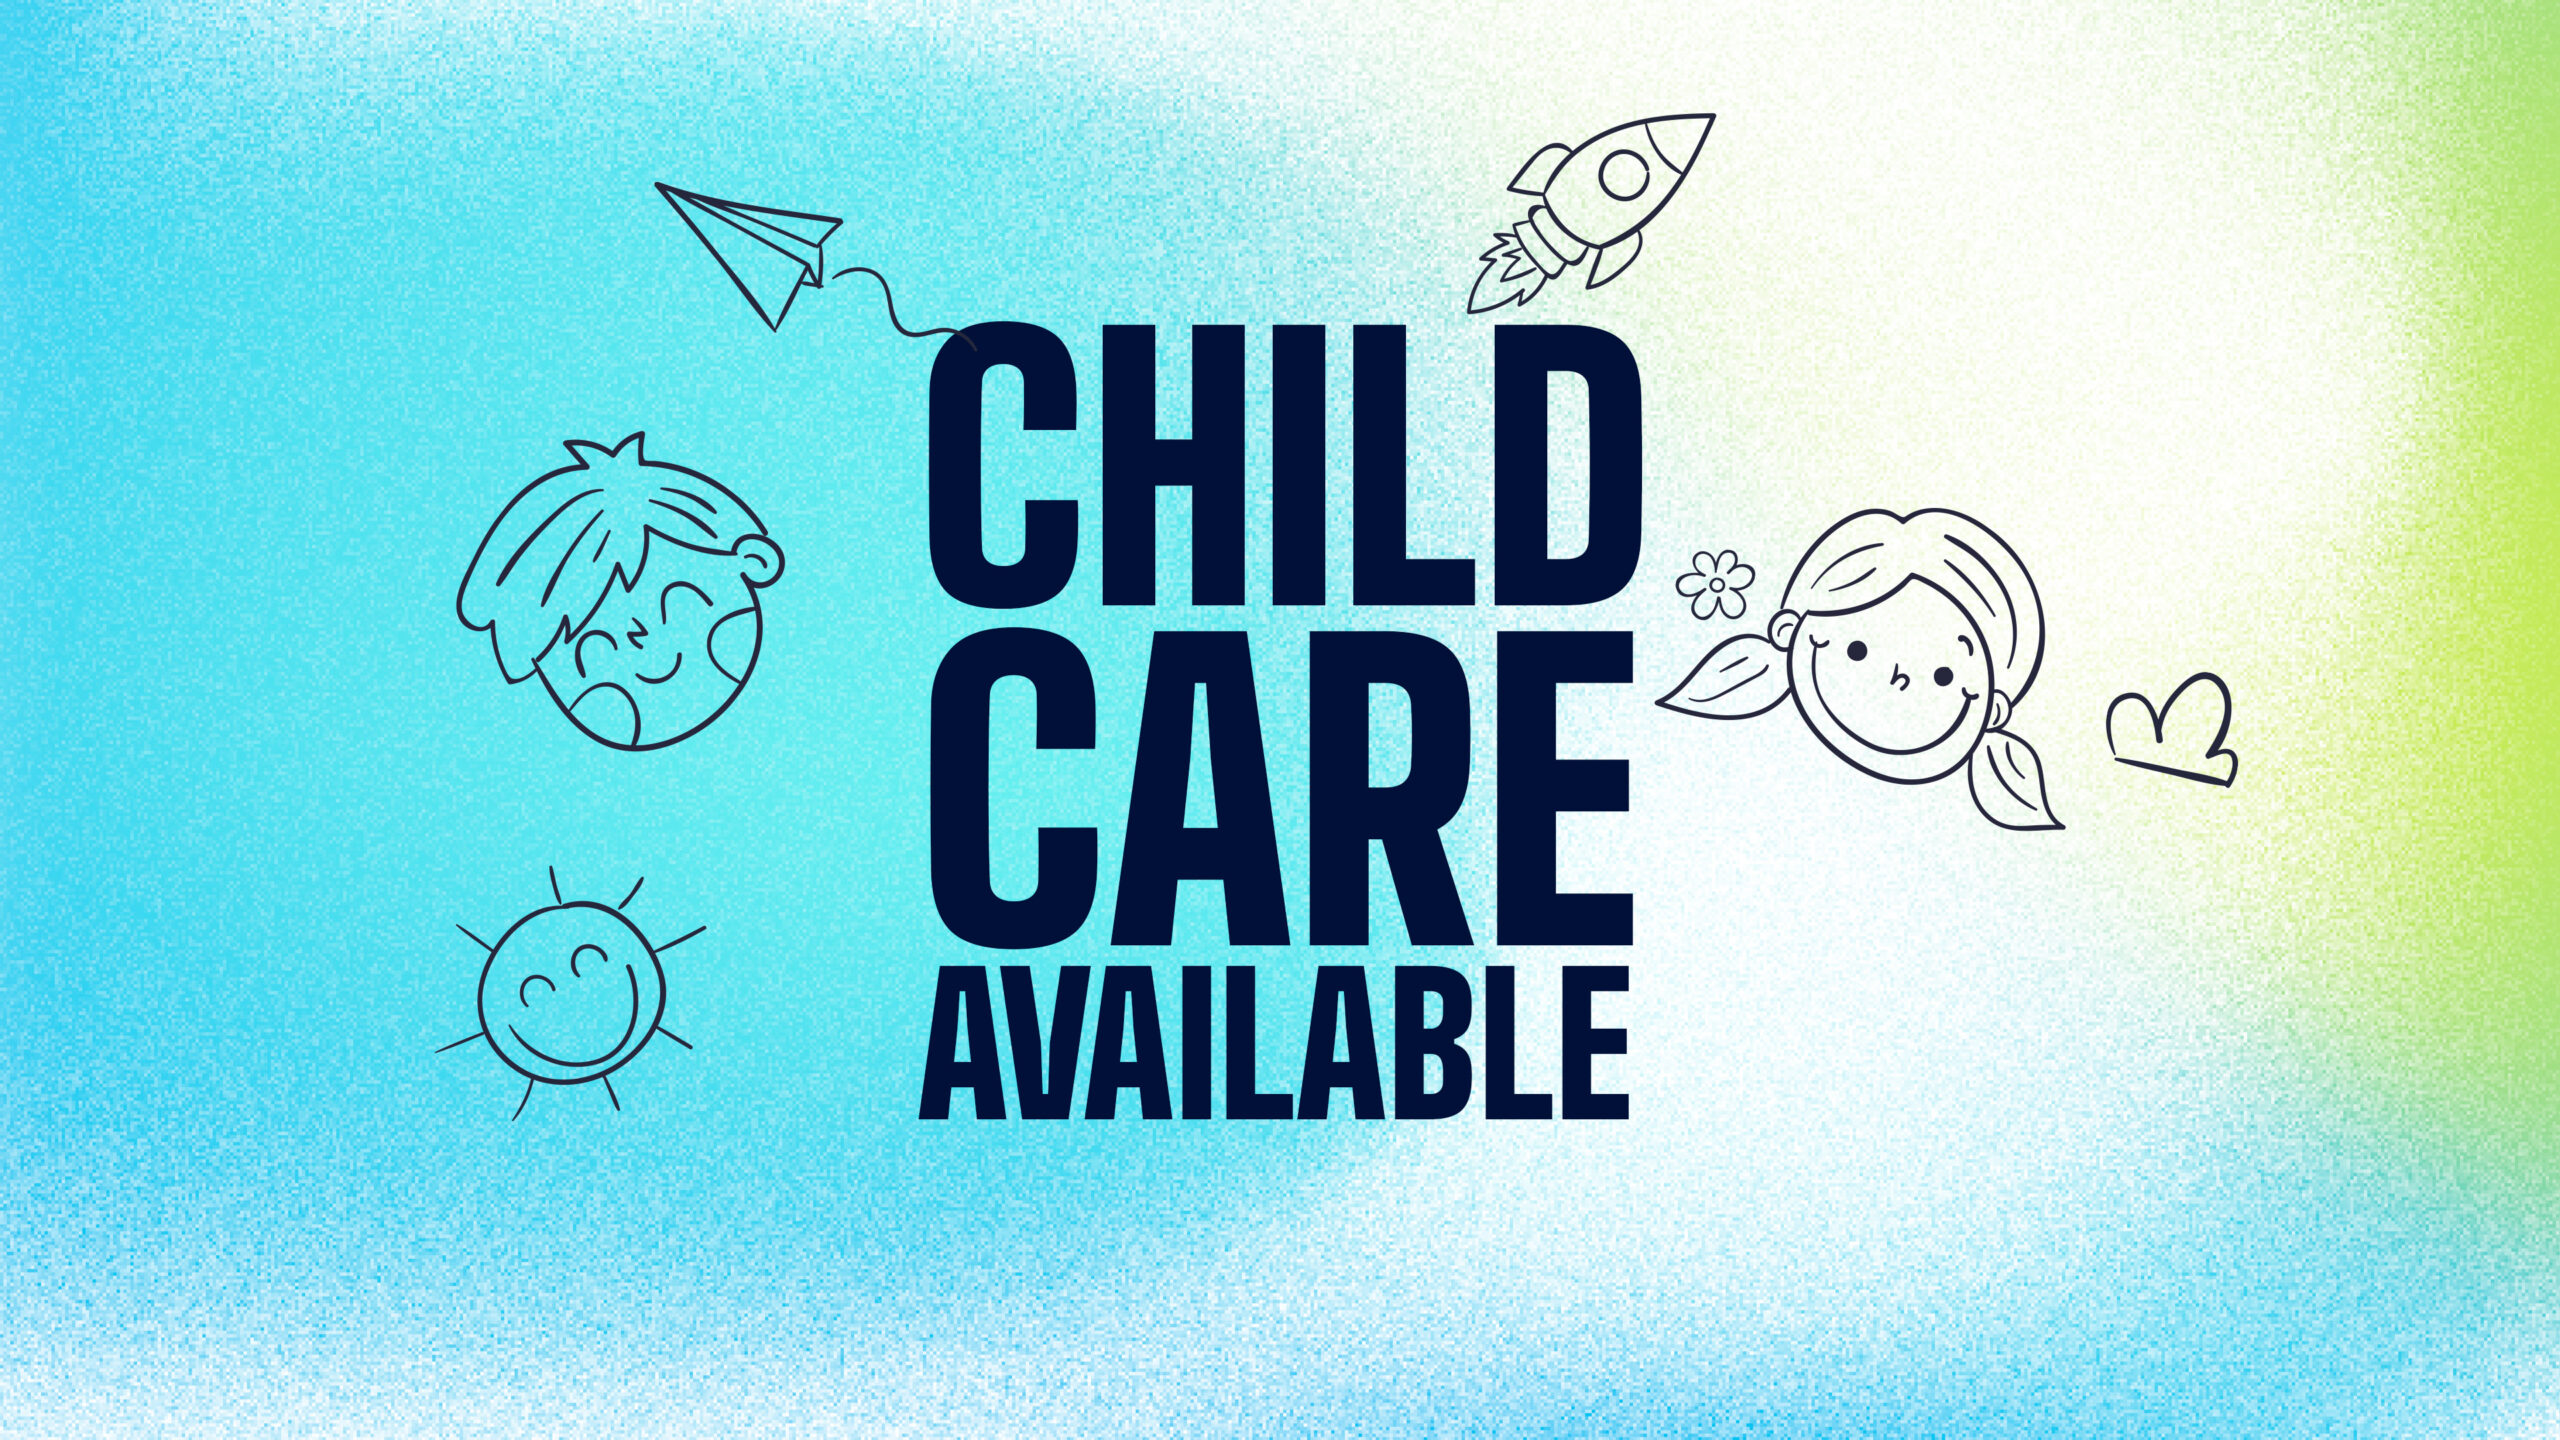 Child Care Available